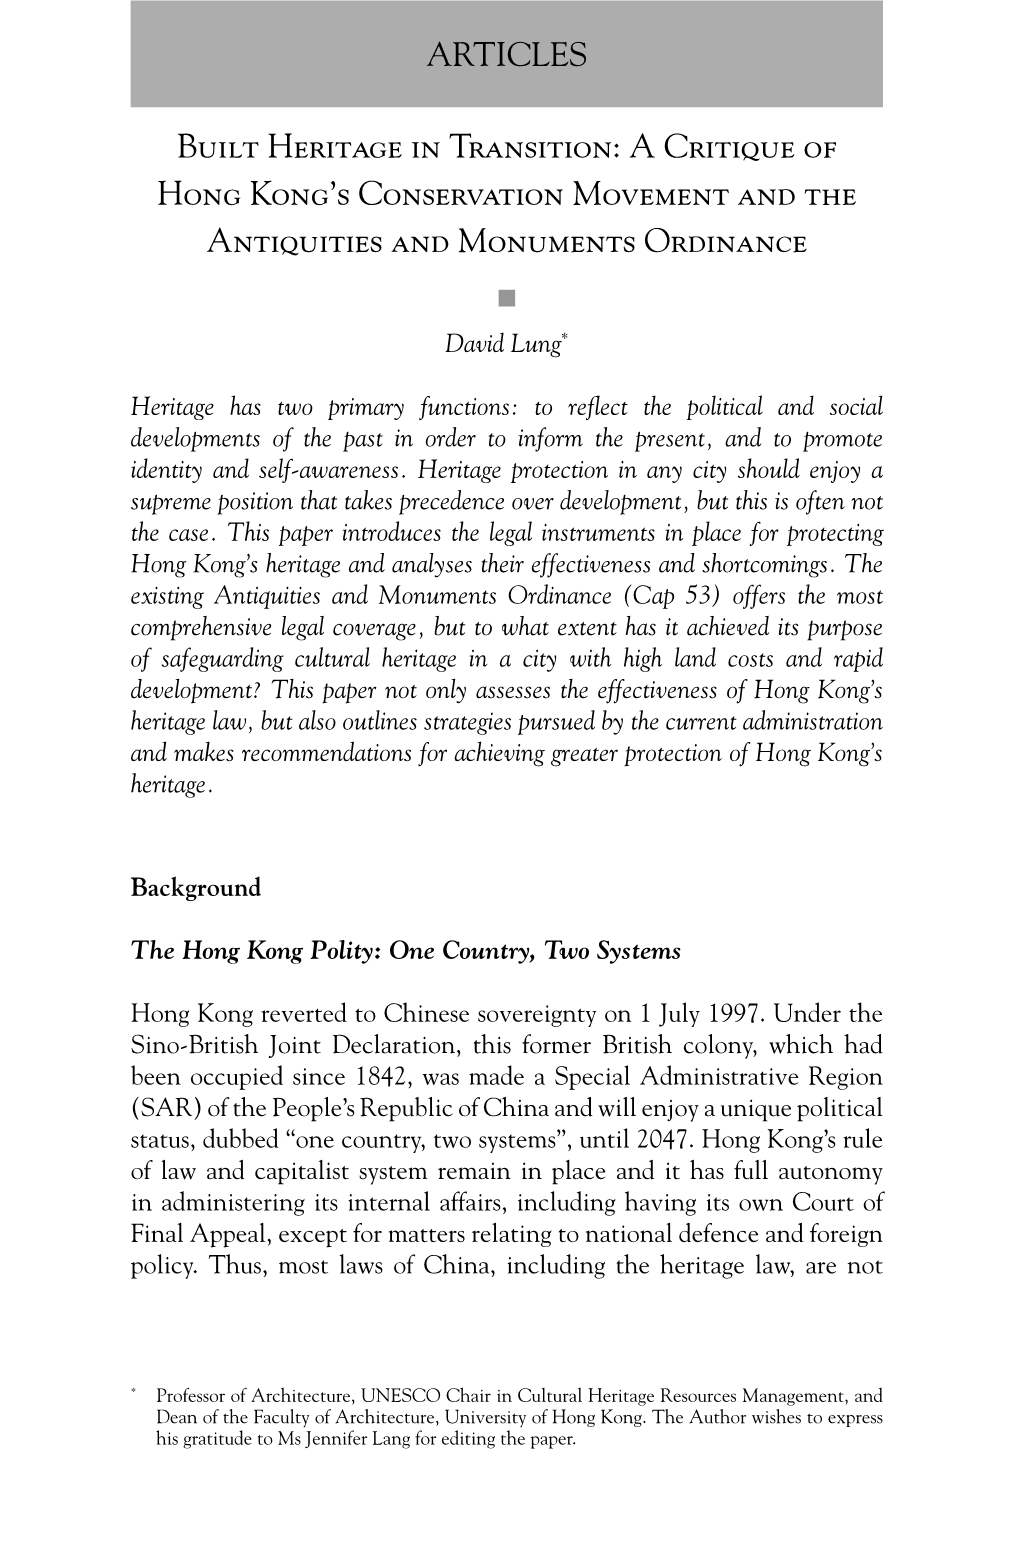 Built Heritage in Transition: a Critique of Hong Kong's Conservation